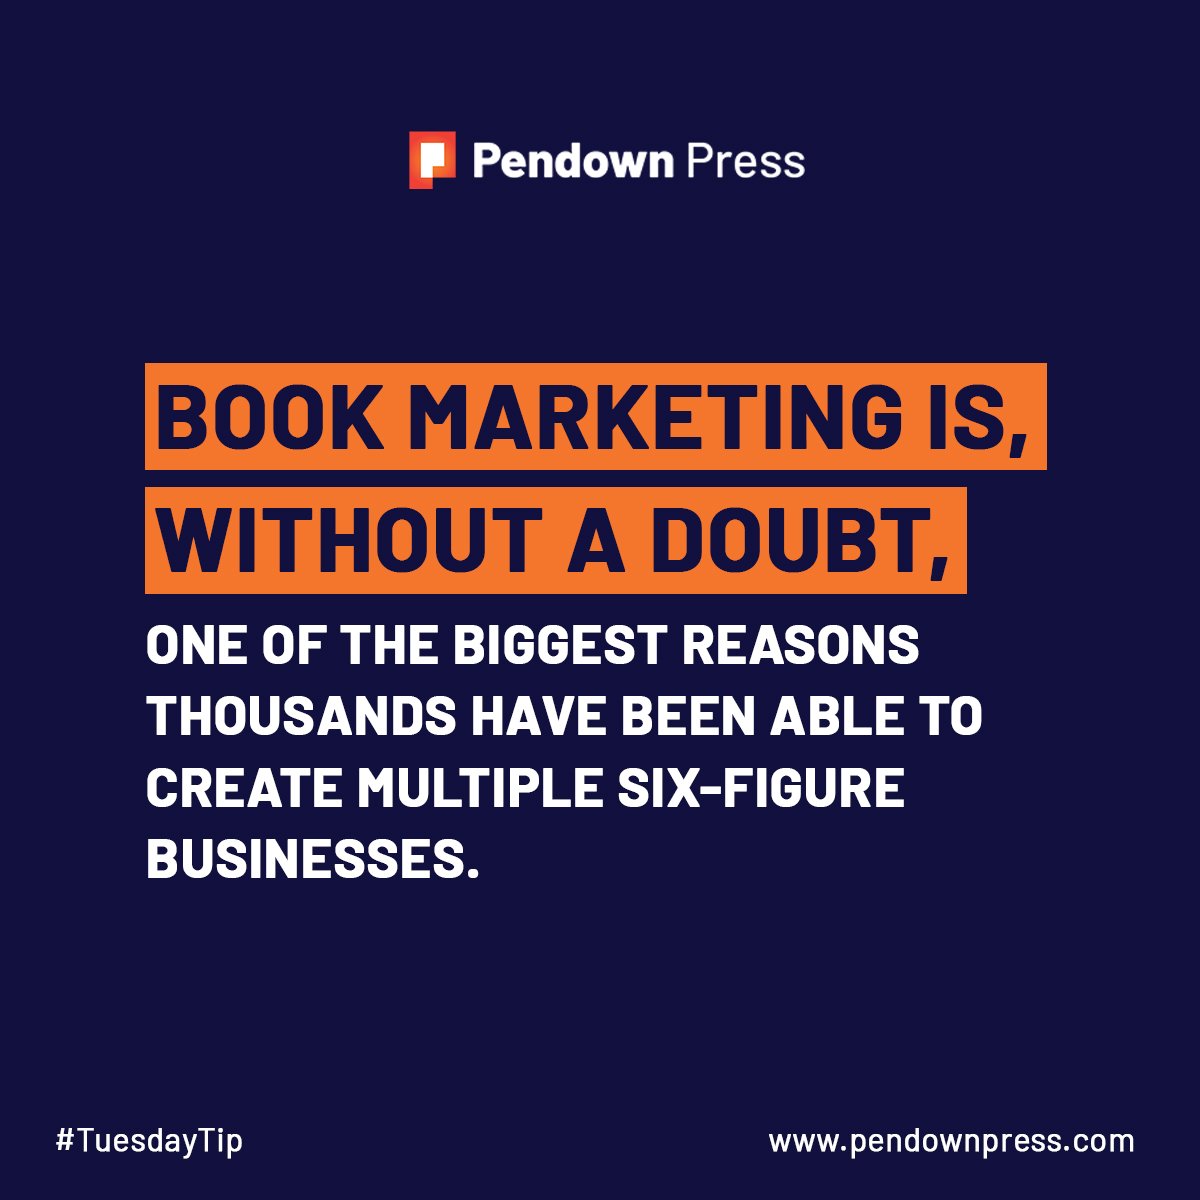 BOOK MARKETING IS WITHOUT A DOUBT...
_______________________________________
From cover to content, discover the art of book marketing and watch your readership soar.

#Publish Your Book Now!
pendownpress.com
.
#TuesdayTips #tuesdayvibes #viral #authors #selfpublishers